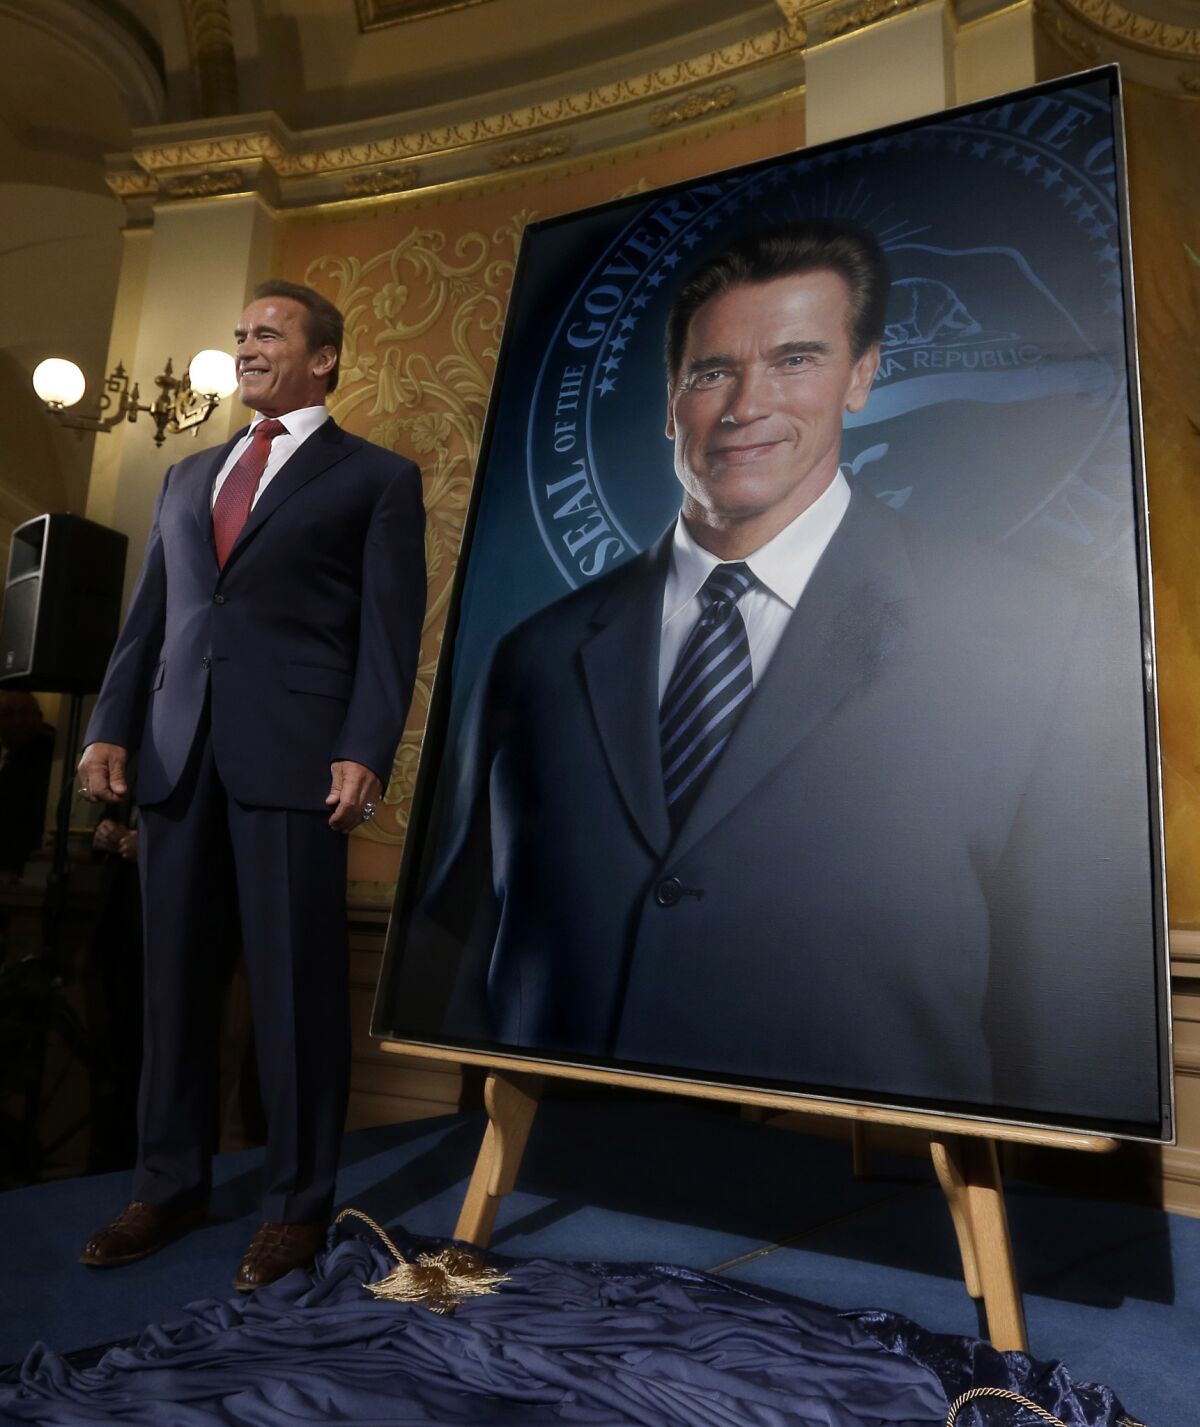 Former California Gov. Arnold Schwarzenegger's official portrait has been unveiled at the Capitol -- minus his ex-wife's face.